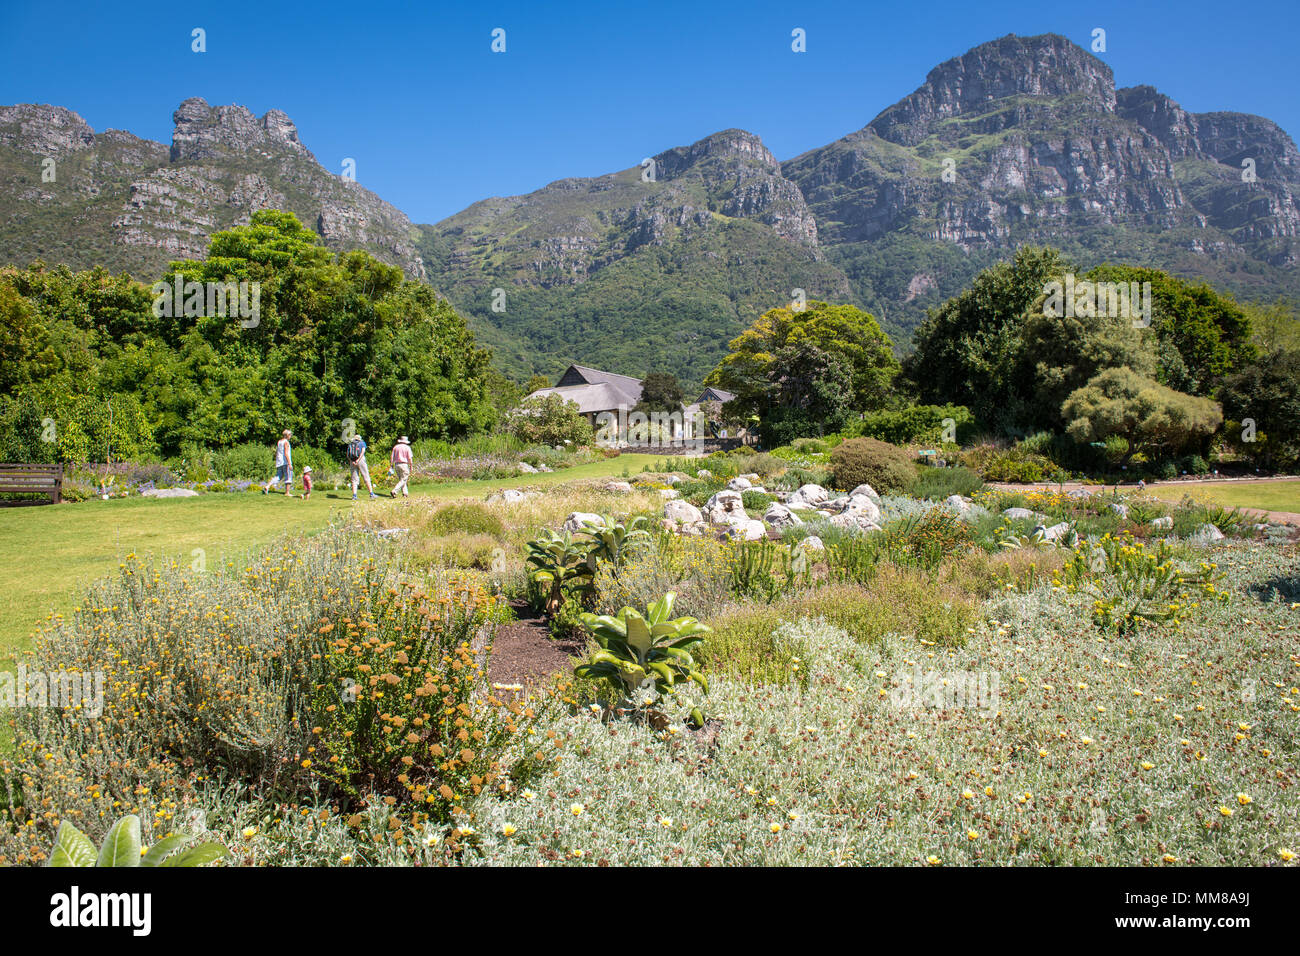 A small group of people walking at the Kirstenbosch Botanical Gardens in Cape Town, South Africa Stock Photo